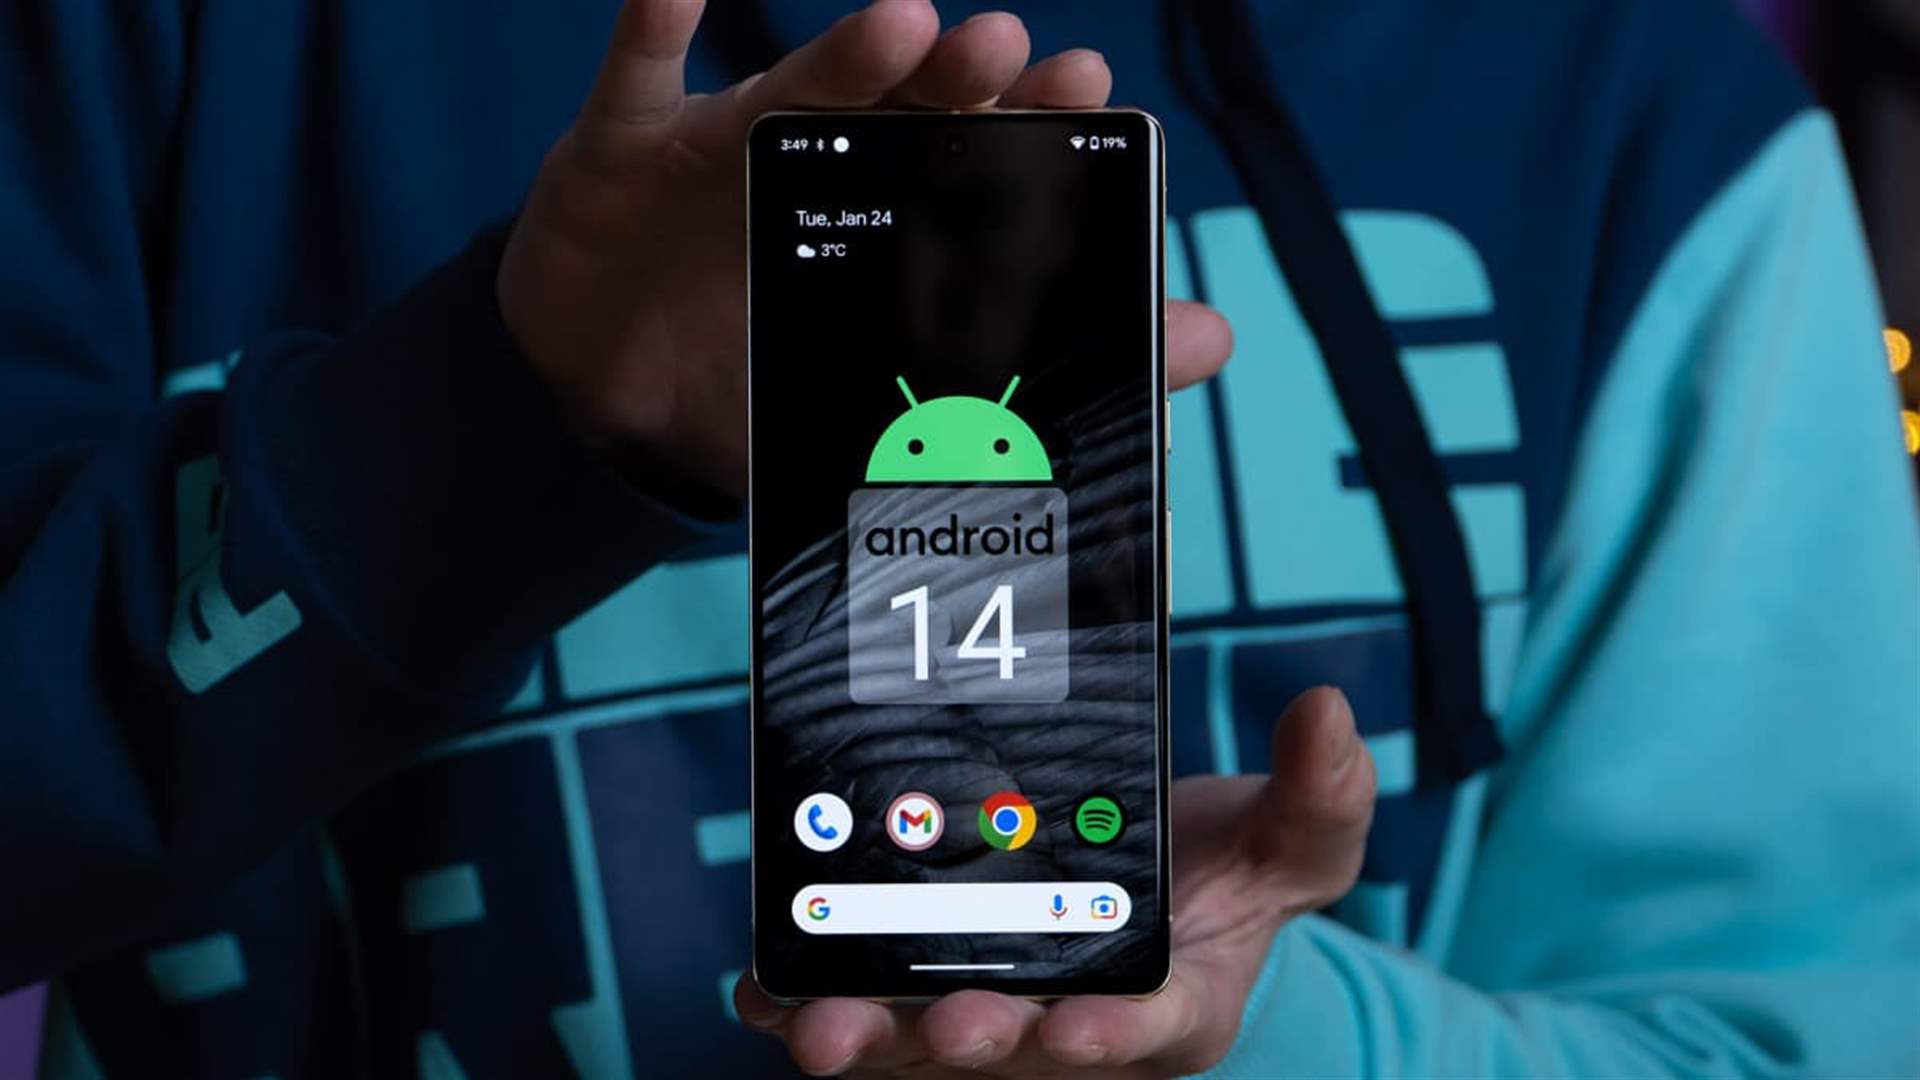 New Lock Screen Customization And Accessibility Features In Android 14